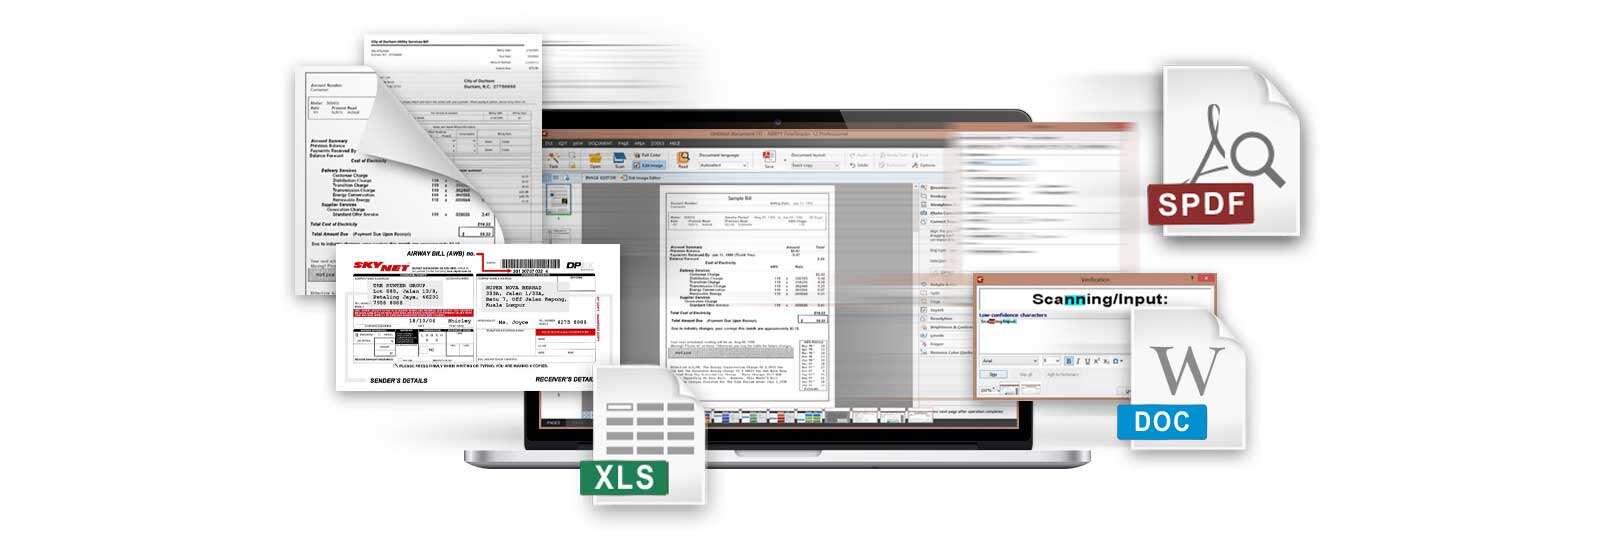 The OpticSlim 550S includes OCR function (powered by ABBYY) that helps to convert scanned paper documents such as receipts/invoice/delivery notes into searchable PDF. 